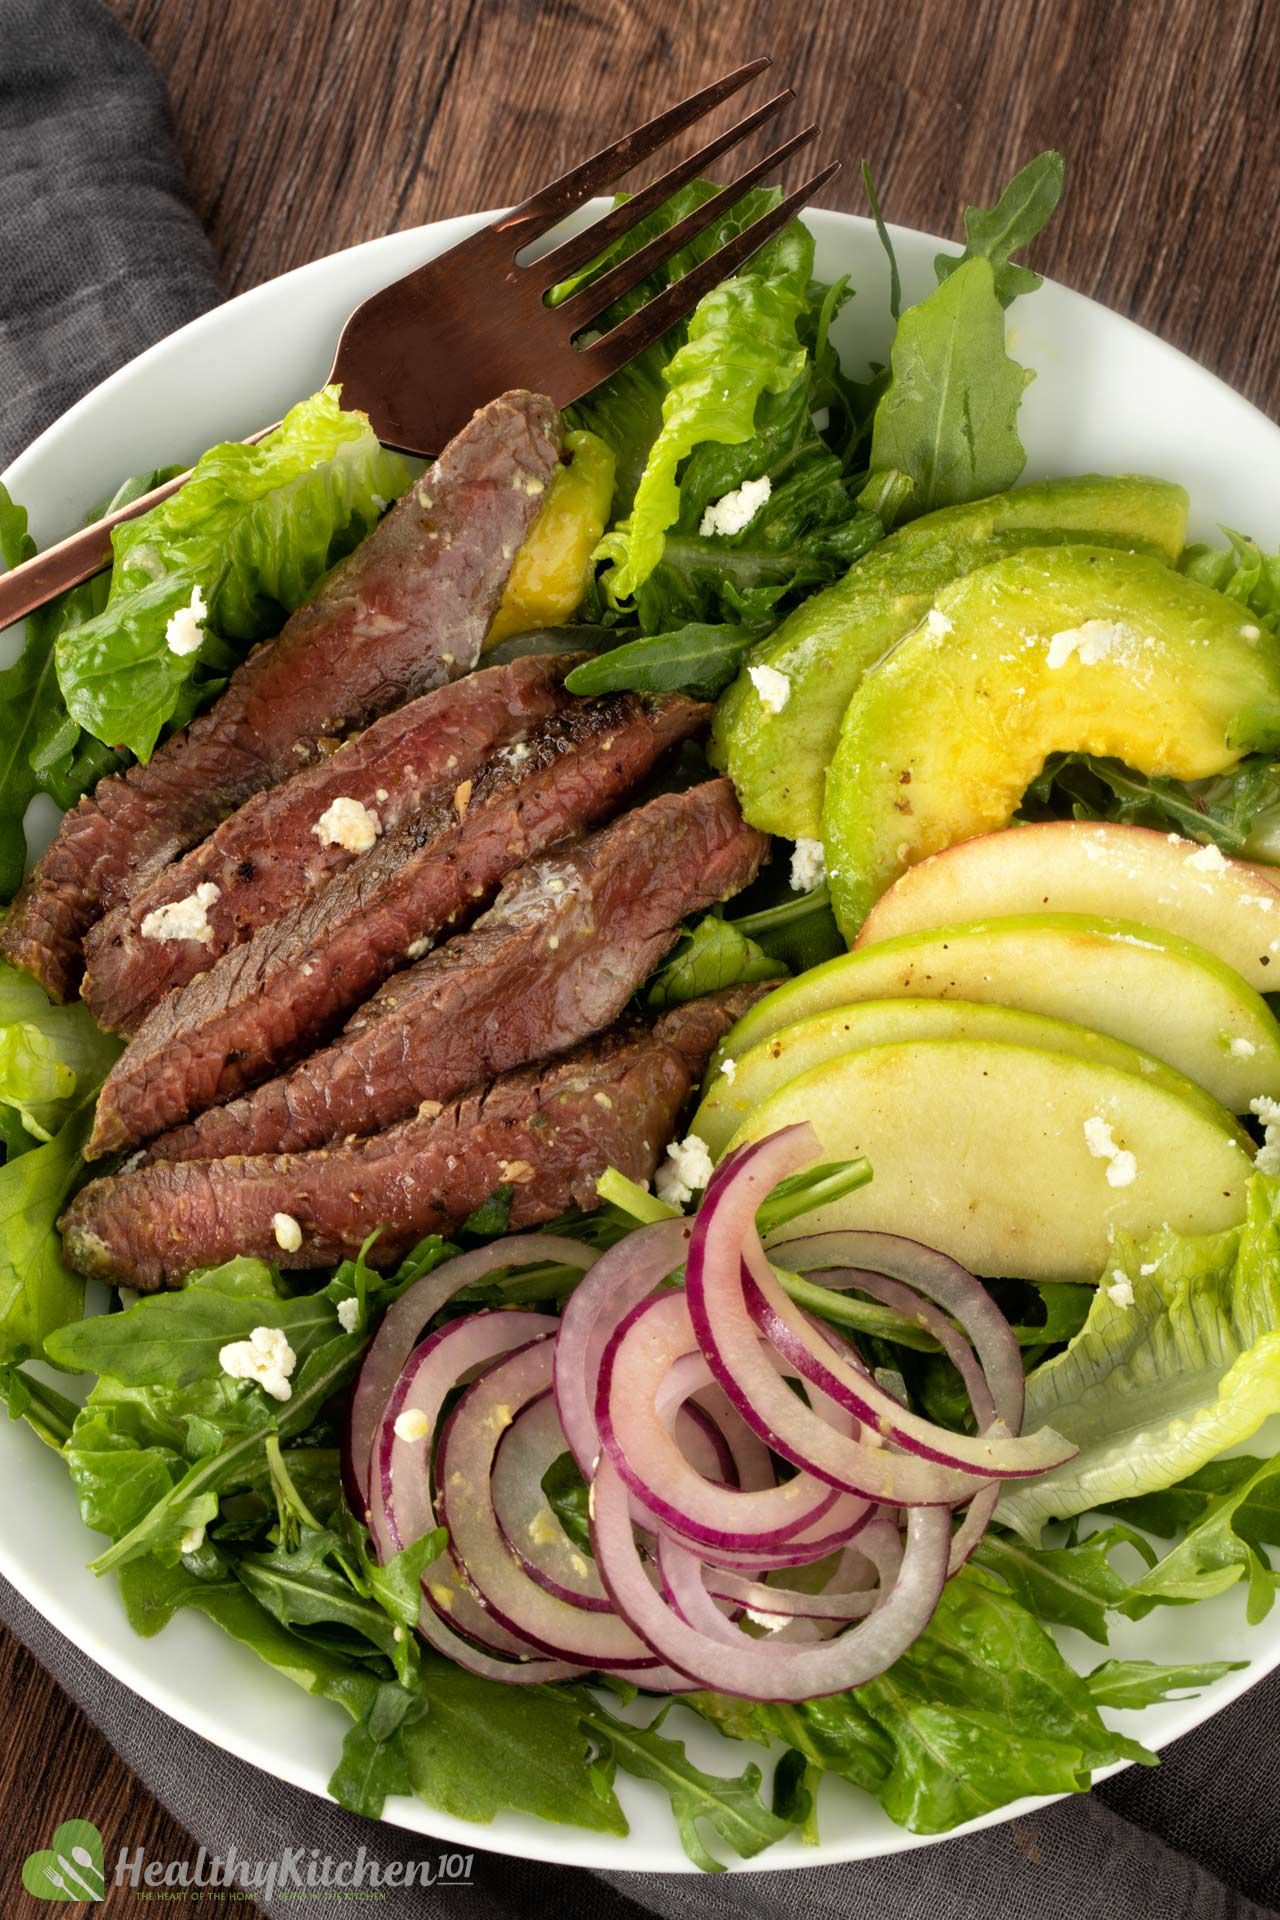 When Steak is Served in a Salad